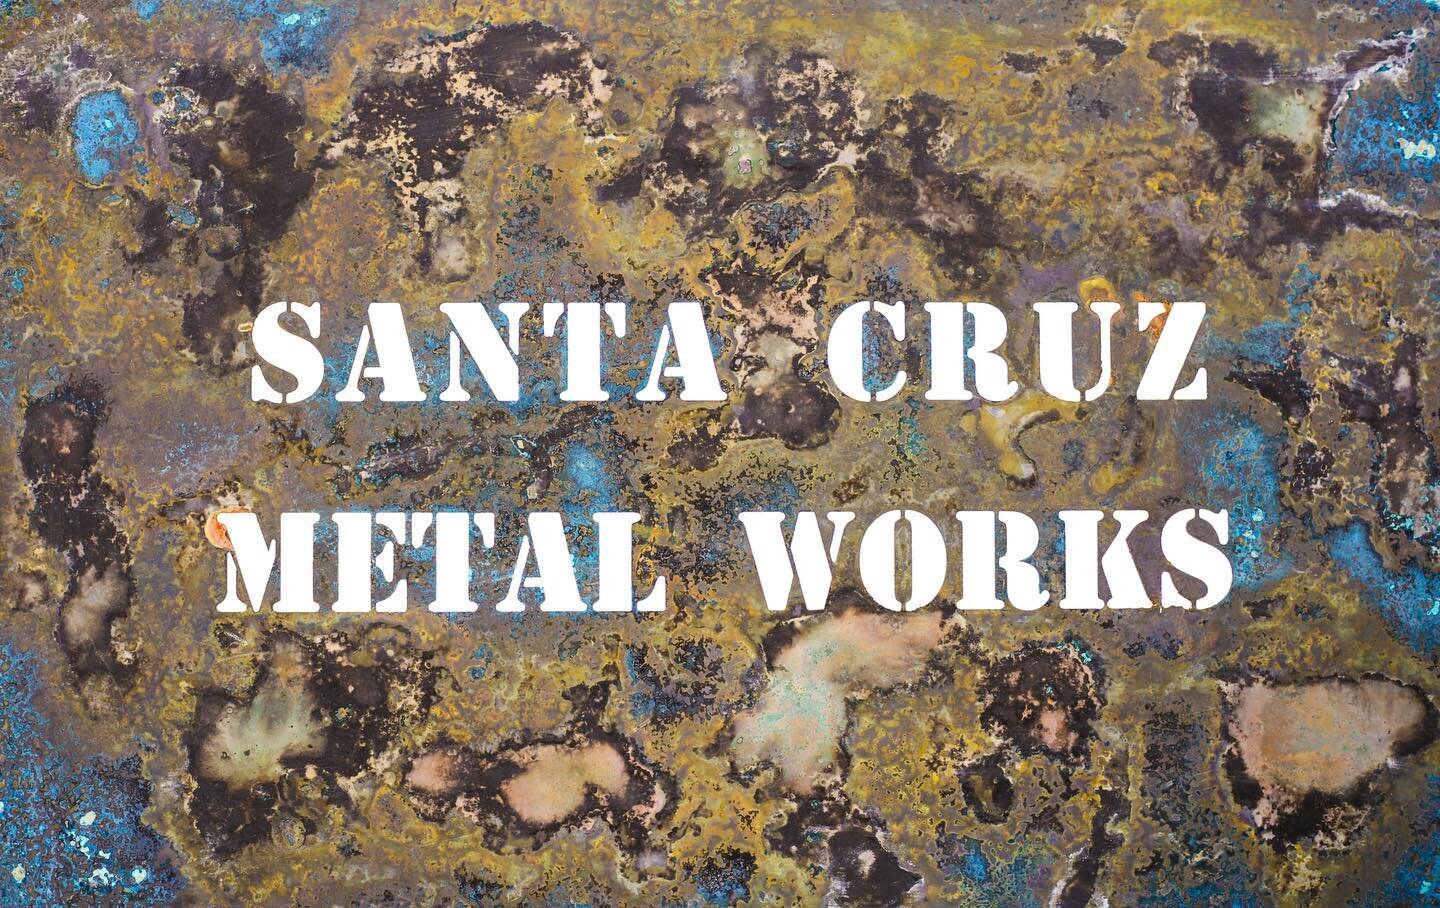 Relocated with a brand new workshop! Excited to show you guys some new projects we are working on! #santacruzmetalworks #fabrication #welding #metal #art